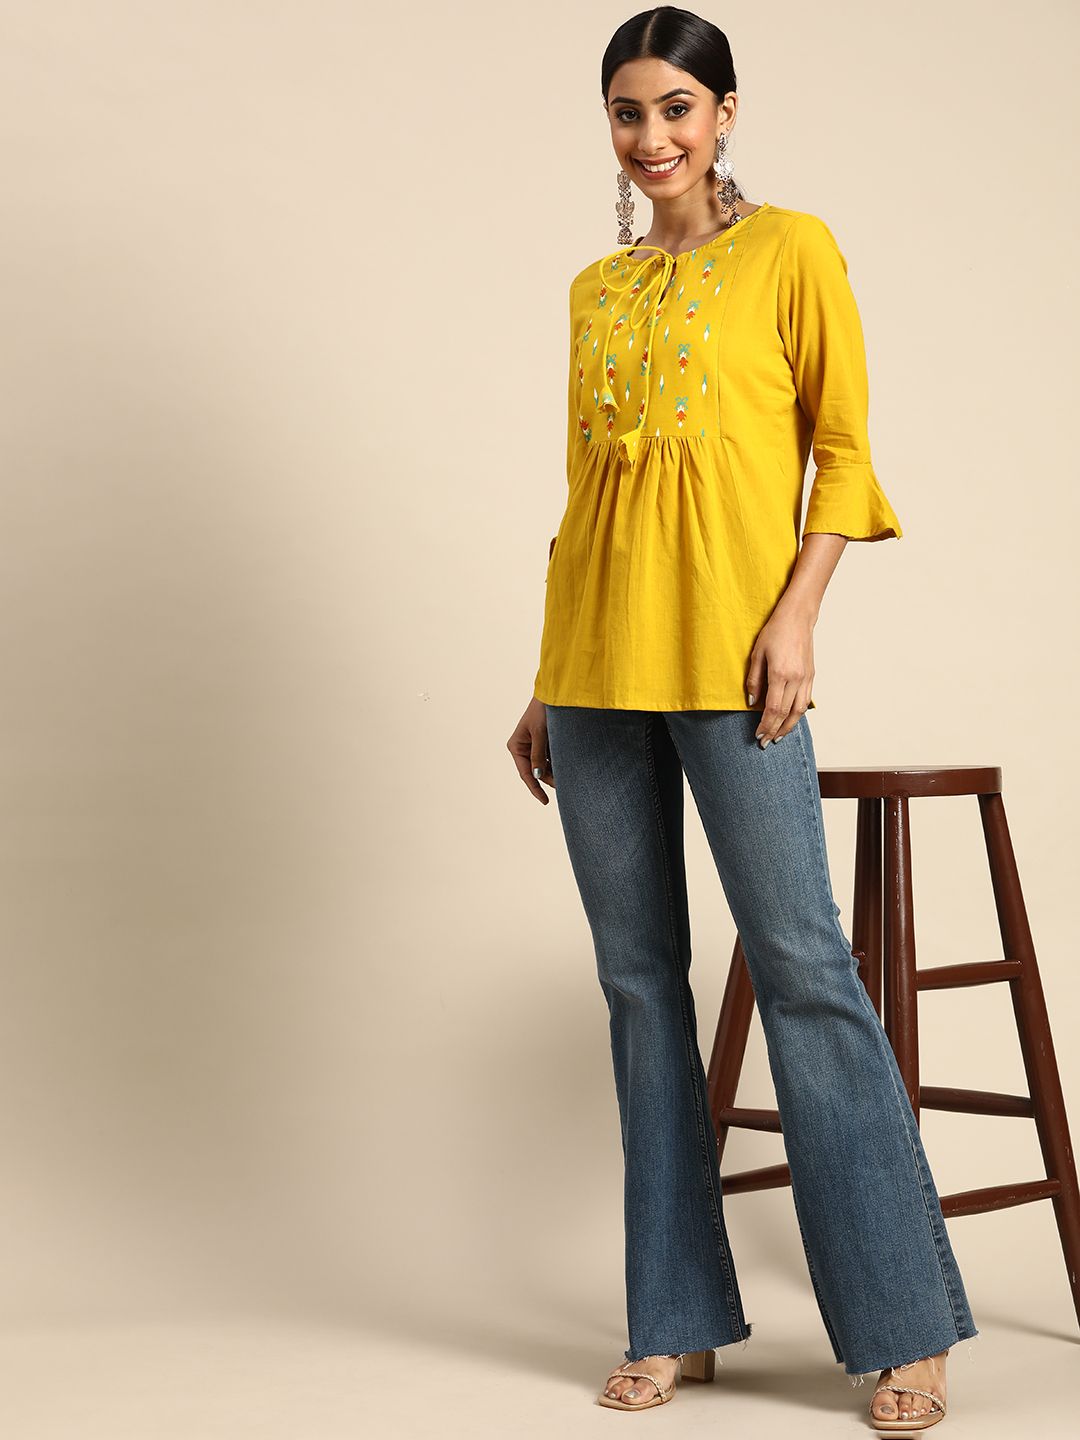 all about you Mustard Yellow & Green Ethnic Motifs Yoke Design Flared Sleeves Pure Cotton Pleated Kurti Price in India